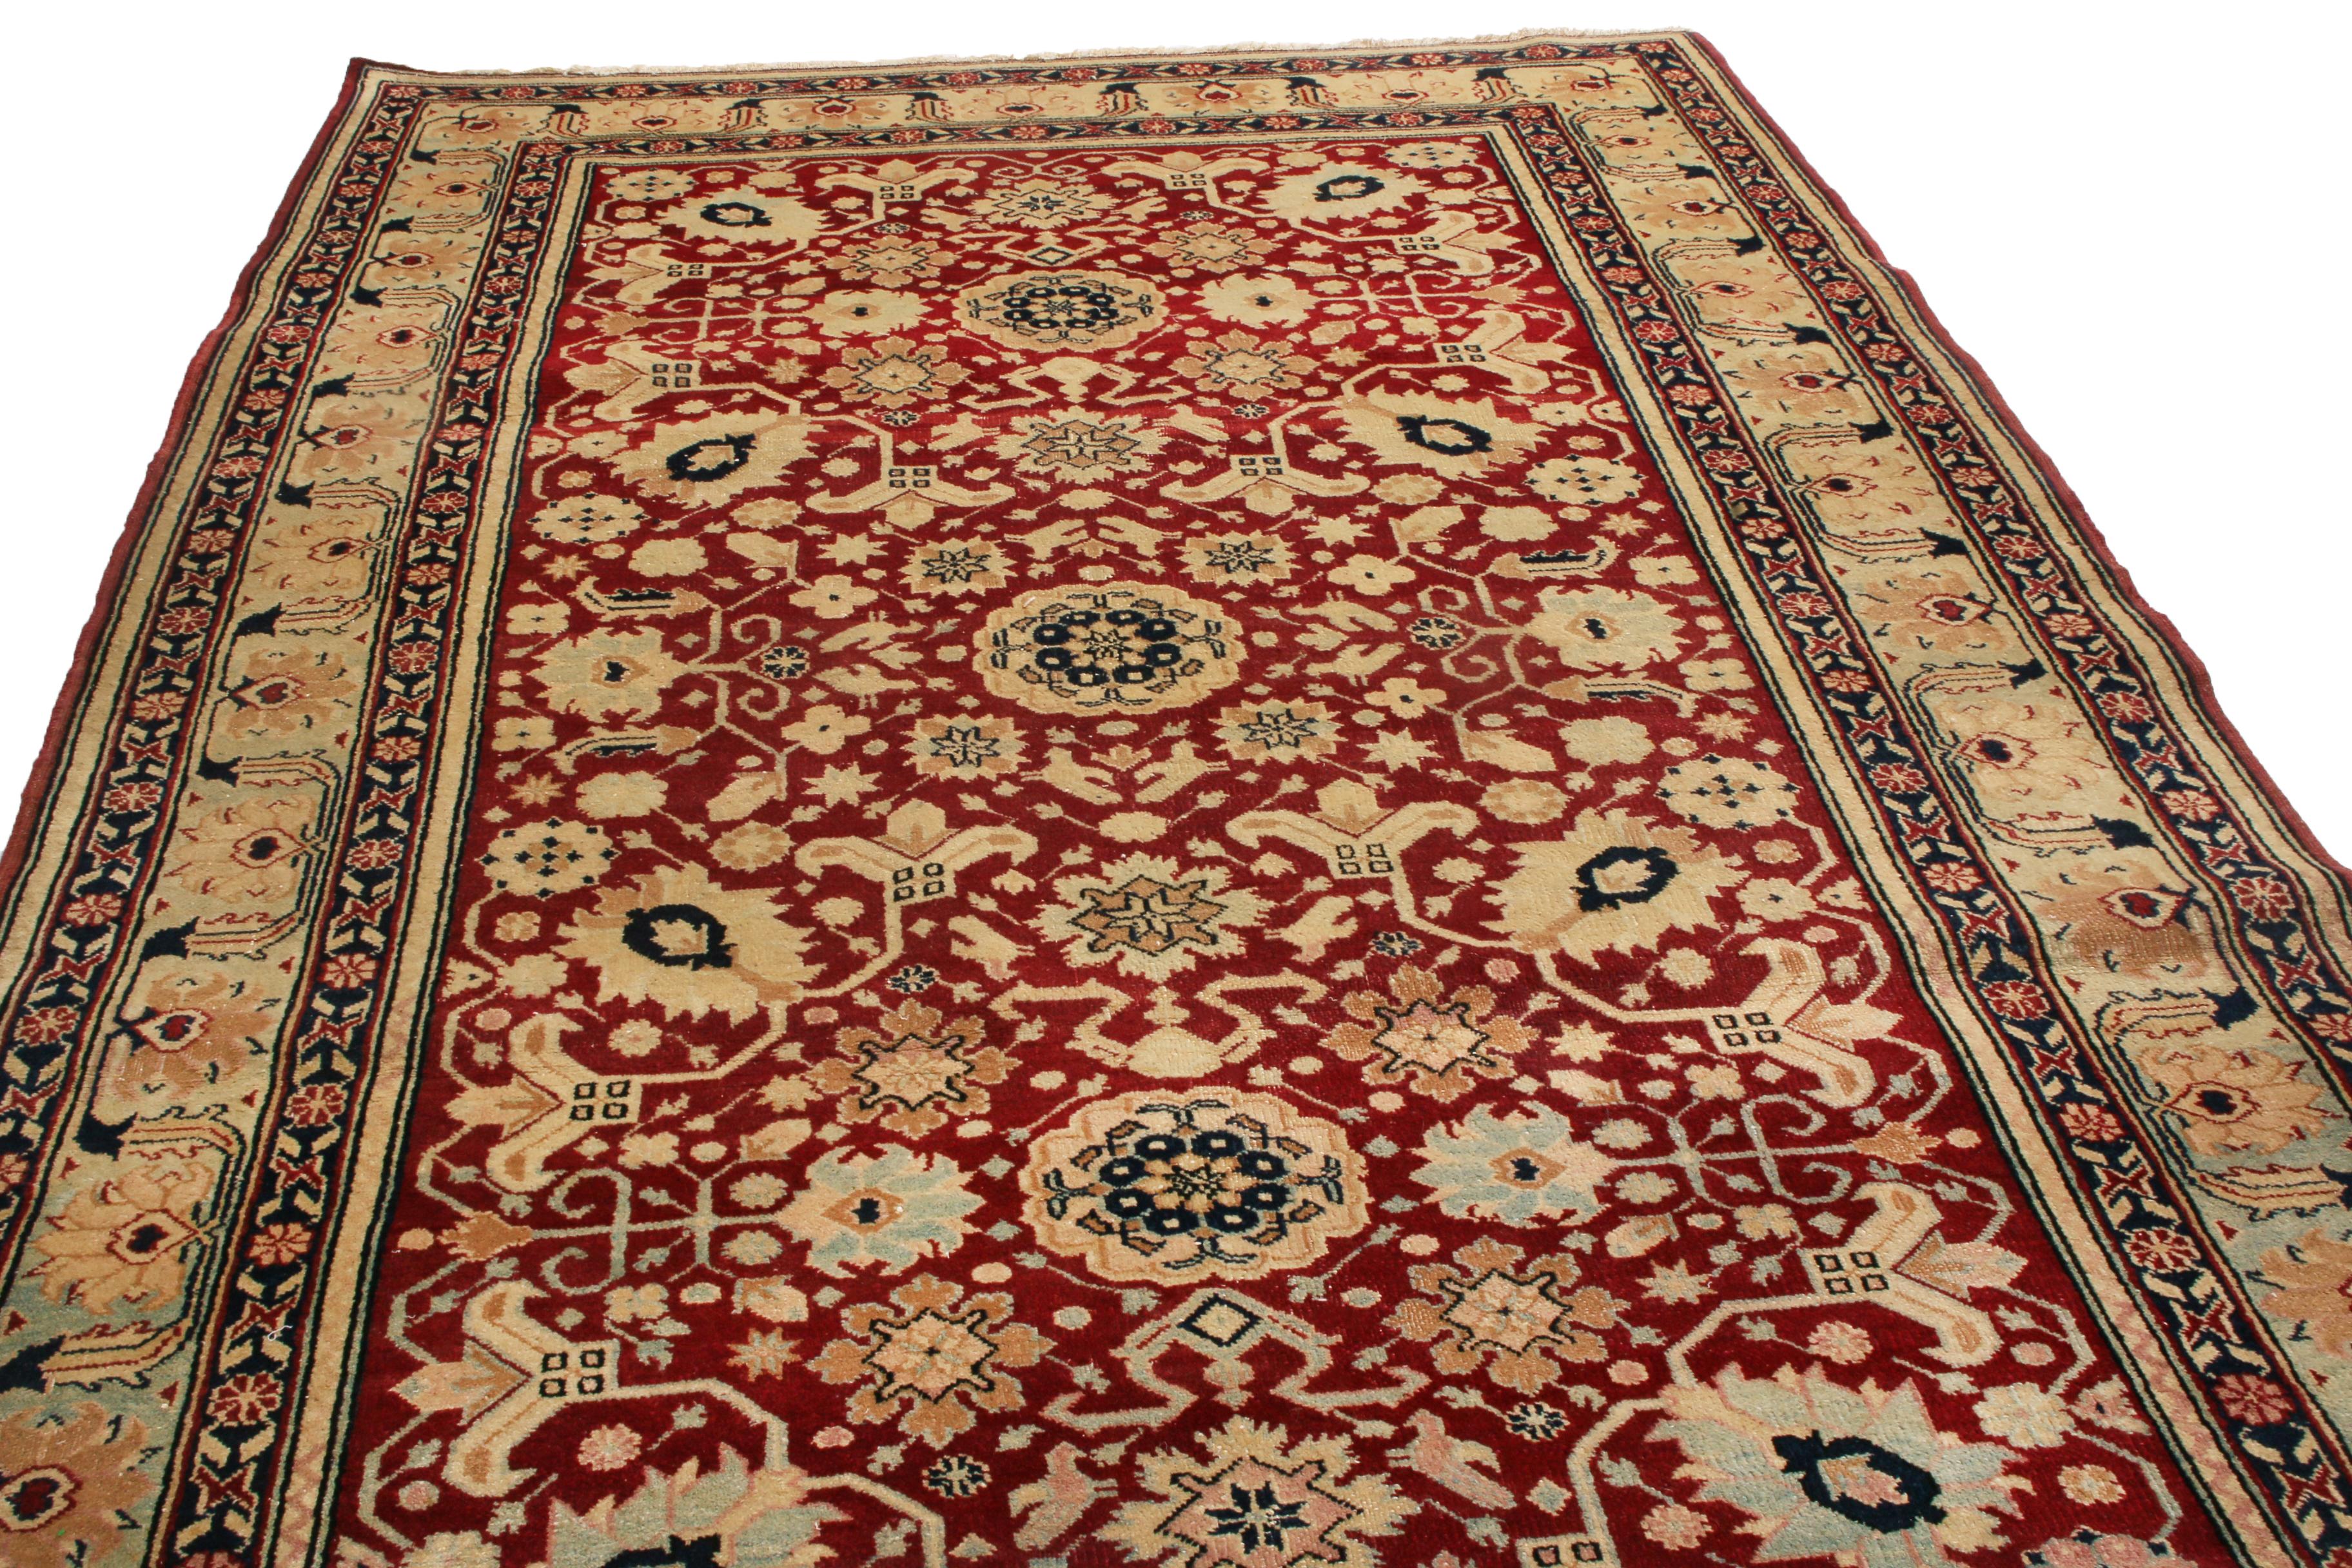 Hand knotted in India originating between 1900-1910, this antique Agra wool rug enjoys a rare bright green colorway in the border, complemented by the classically rich autumnal burgundy and beige-gold hues. A marriage of intricacy and gentility, the